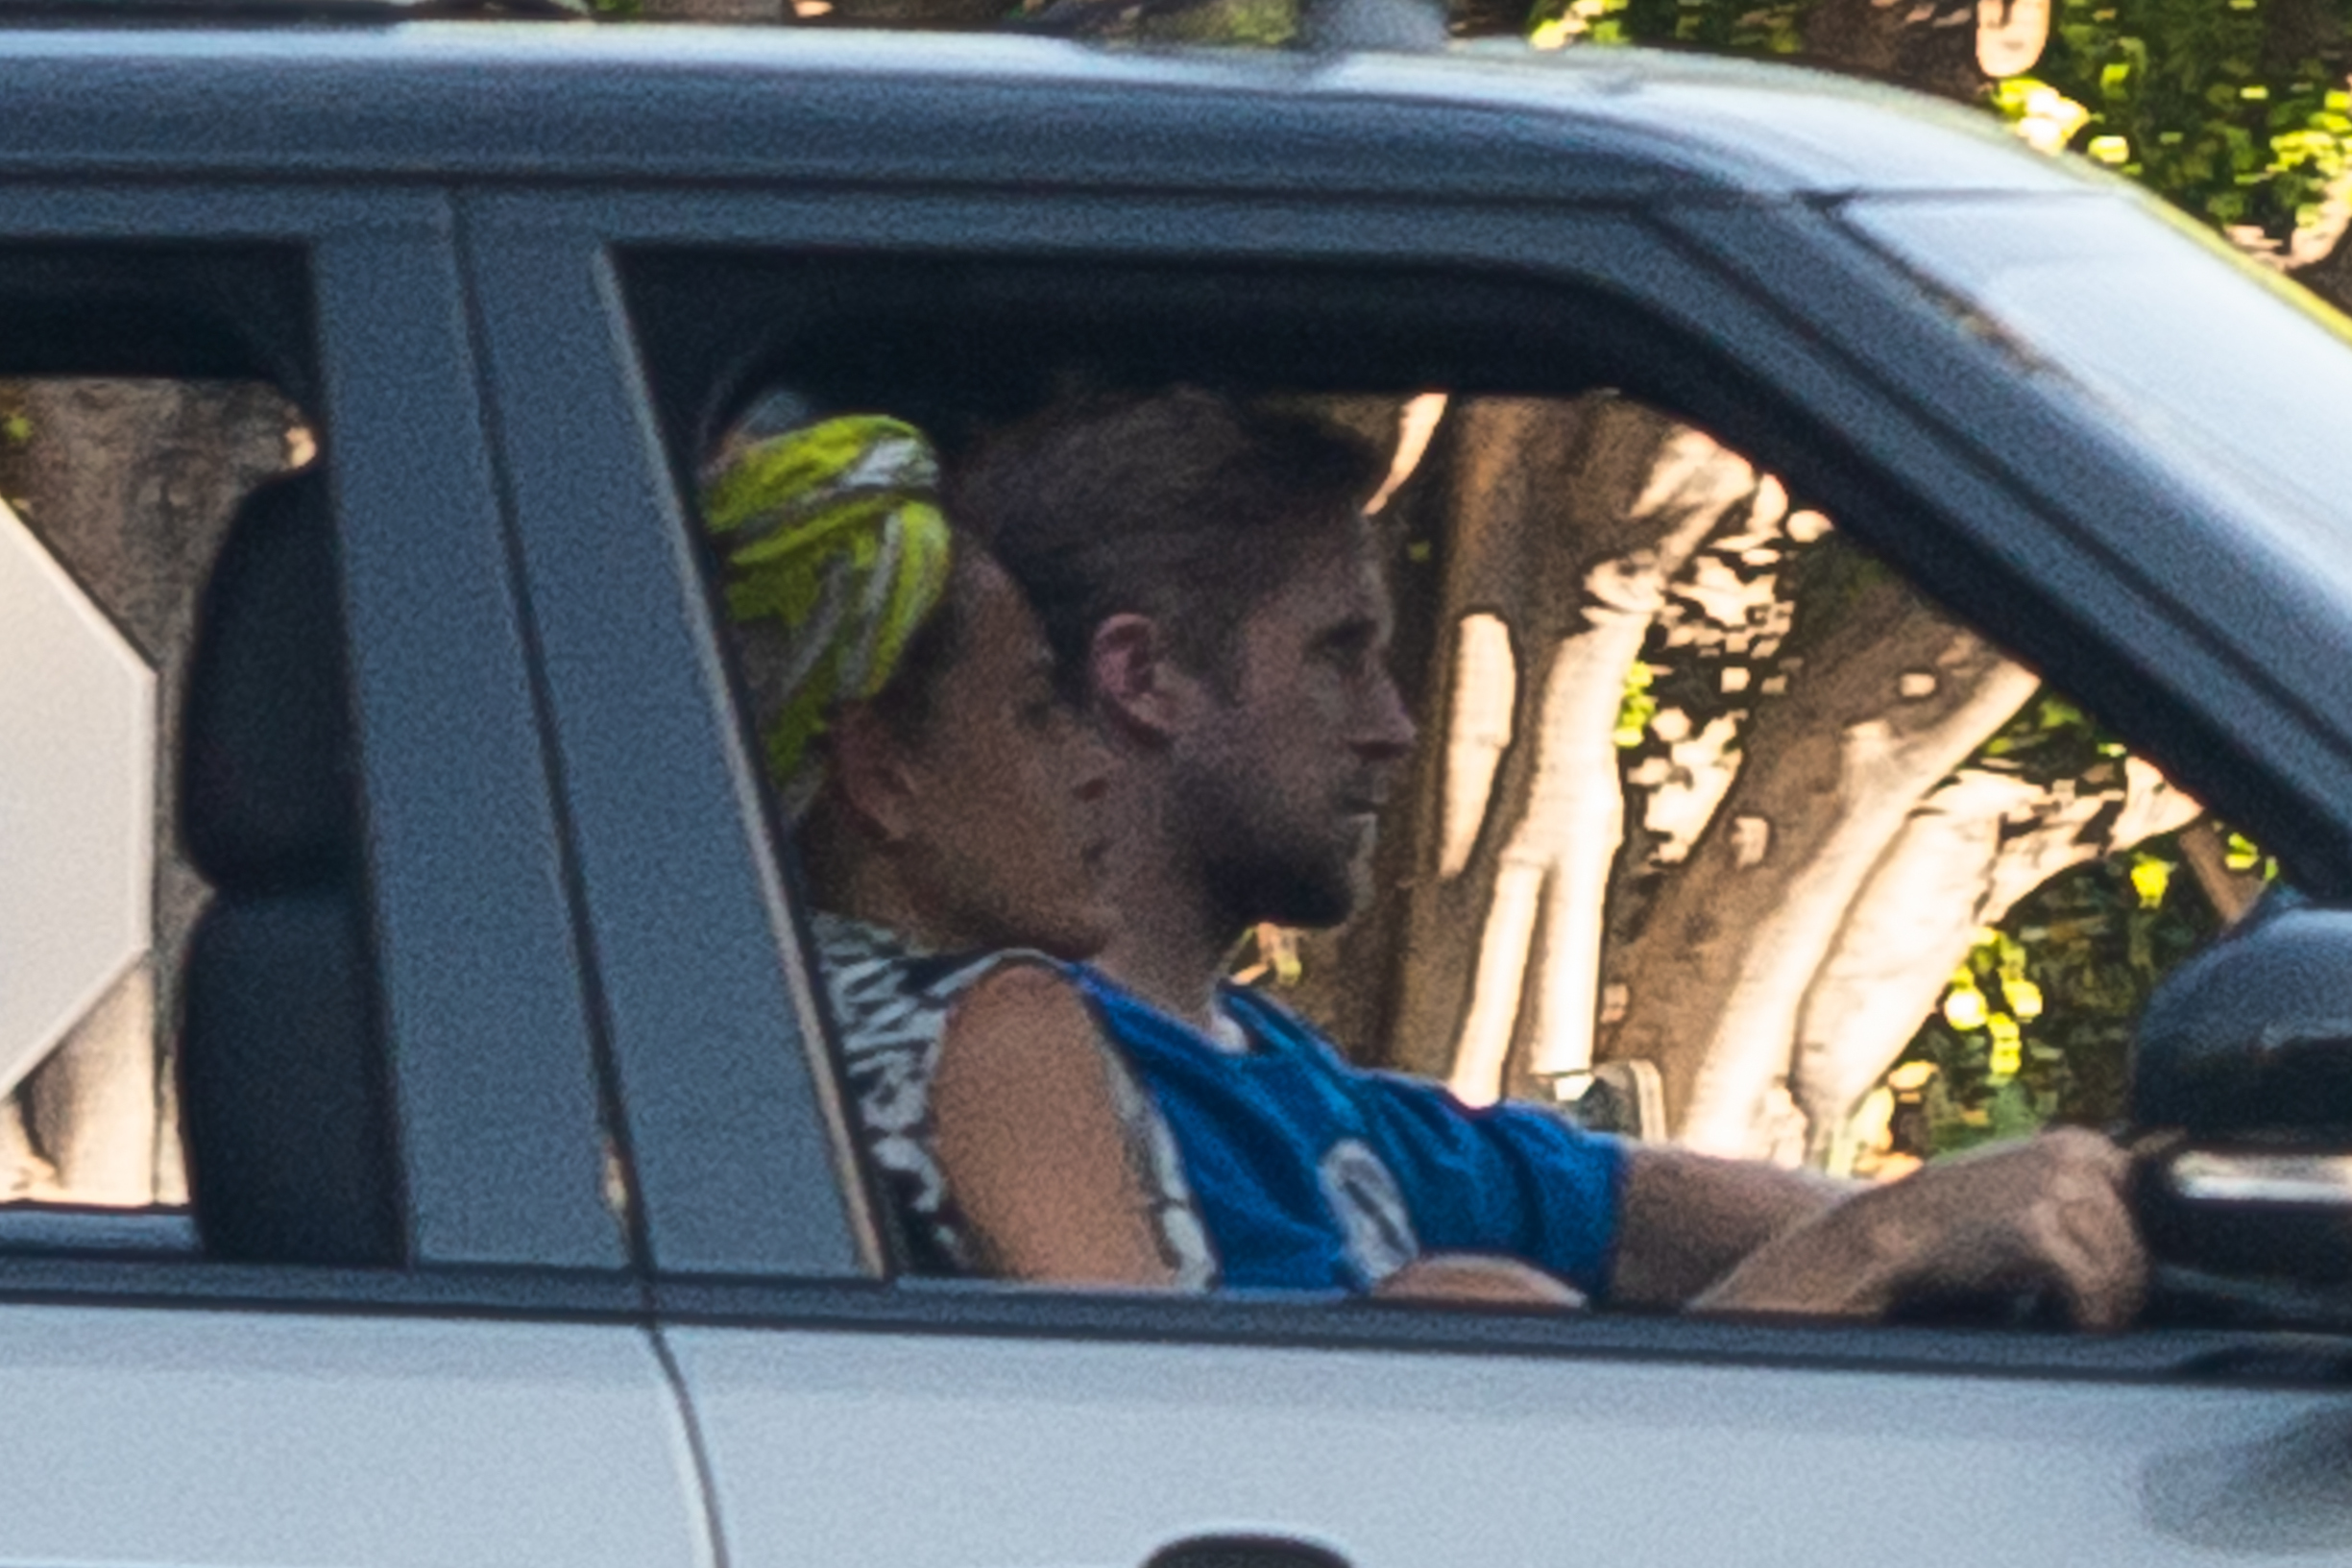 EXCLUSIVE: Ryan Gosling and Eva Mendez are seen driving home from dropping off gifts at a family members house.
**SPECIAL INSTRUCTIONS*** Please pixelate children's faces before publication.***.
11 Jul 2020,Image: 542100511, License: Rights-managed, Restrictions: World Rights, Model Release: no, Credit line: Mr. E /P&P MEGA / The Mega Agency / Profimedia